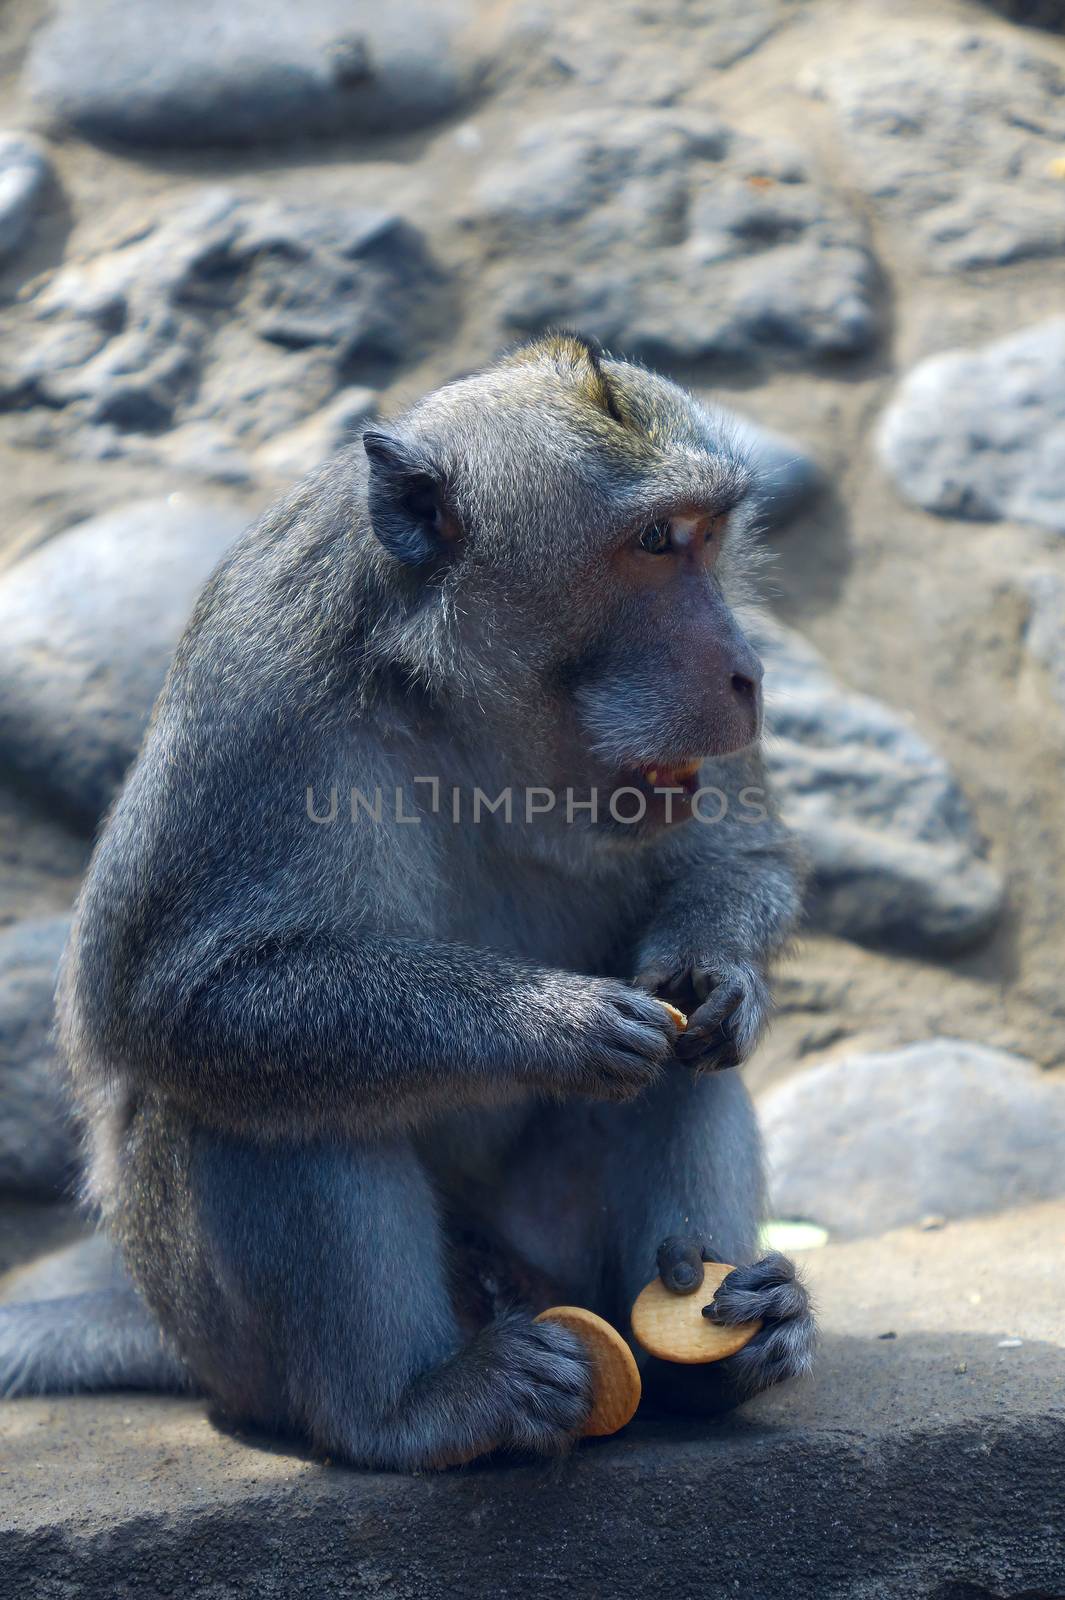 Monkey with cookies in Bali, Indonesia.